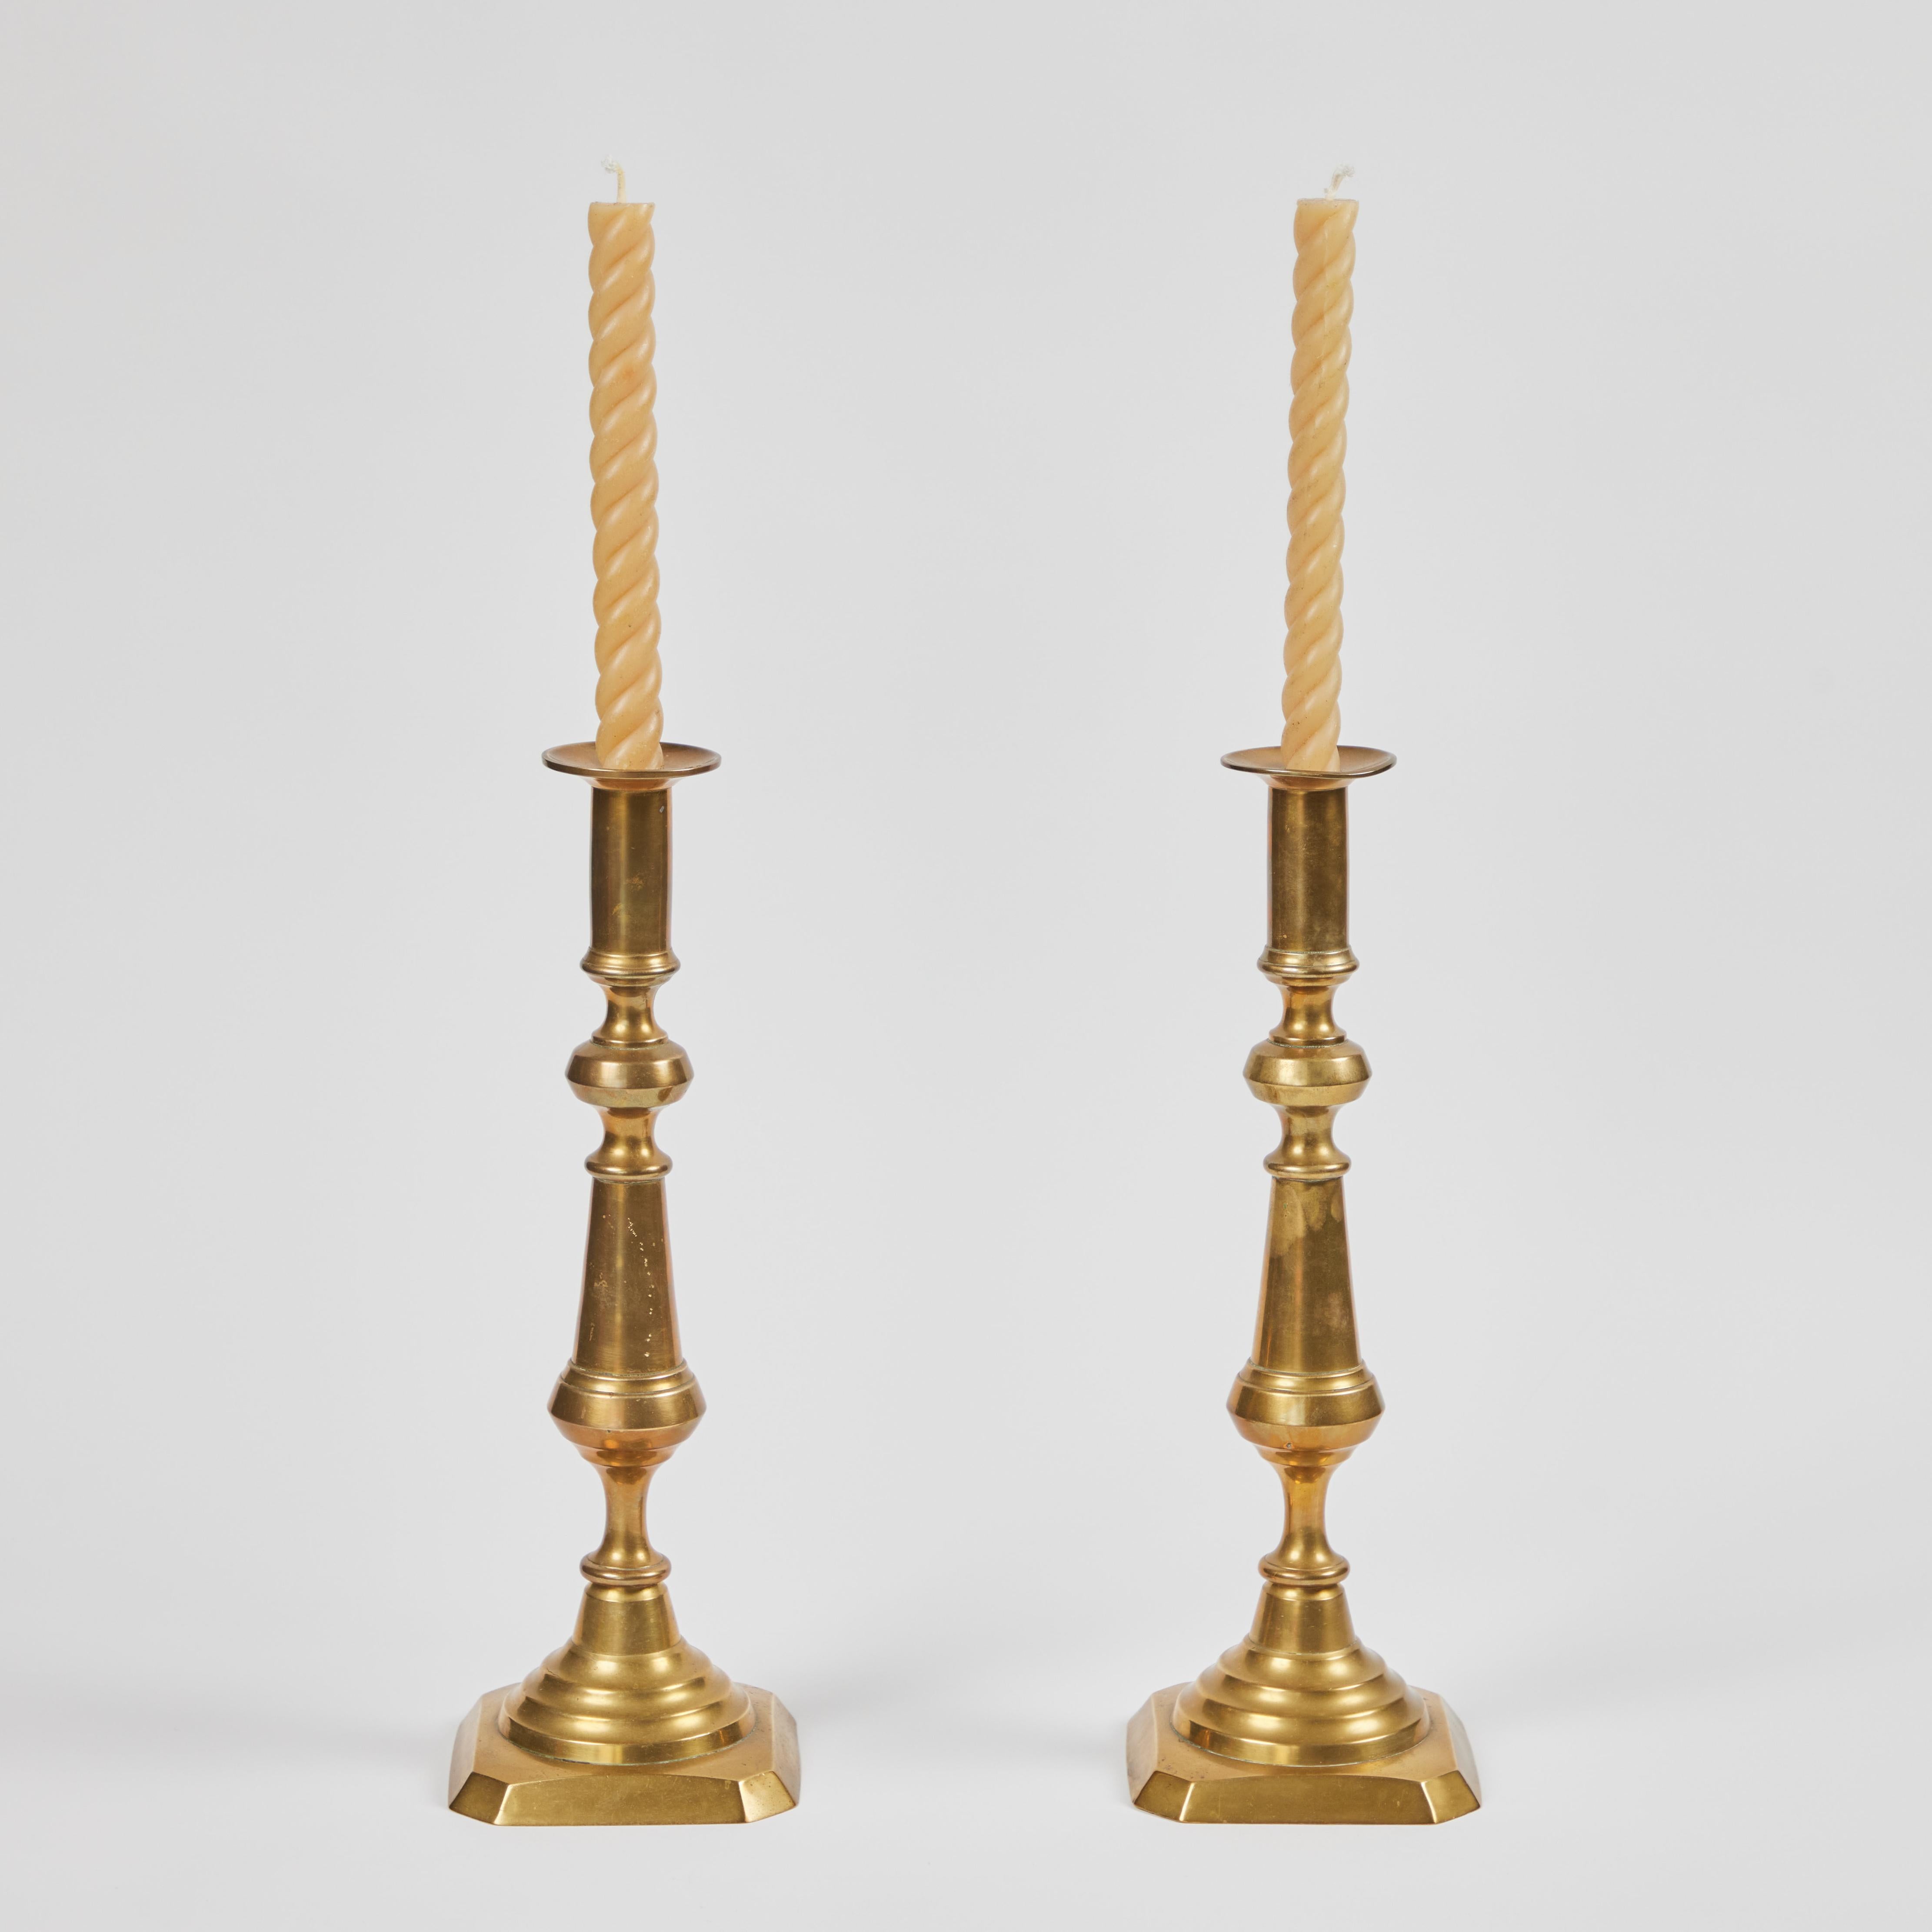 We love this pair of outstanding oversized antique brass candlesticks. They stand tall and are the perfect to accent to any table, side board or mantle. They have a wax pusher feature and display a beautiful rich natural aged patina finish. They